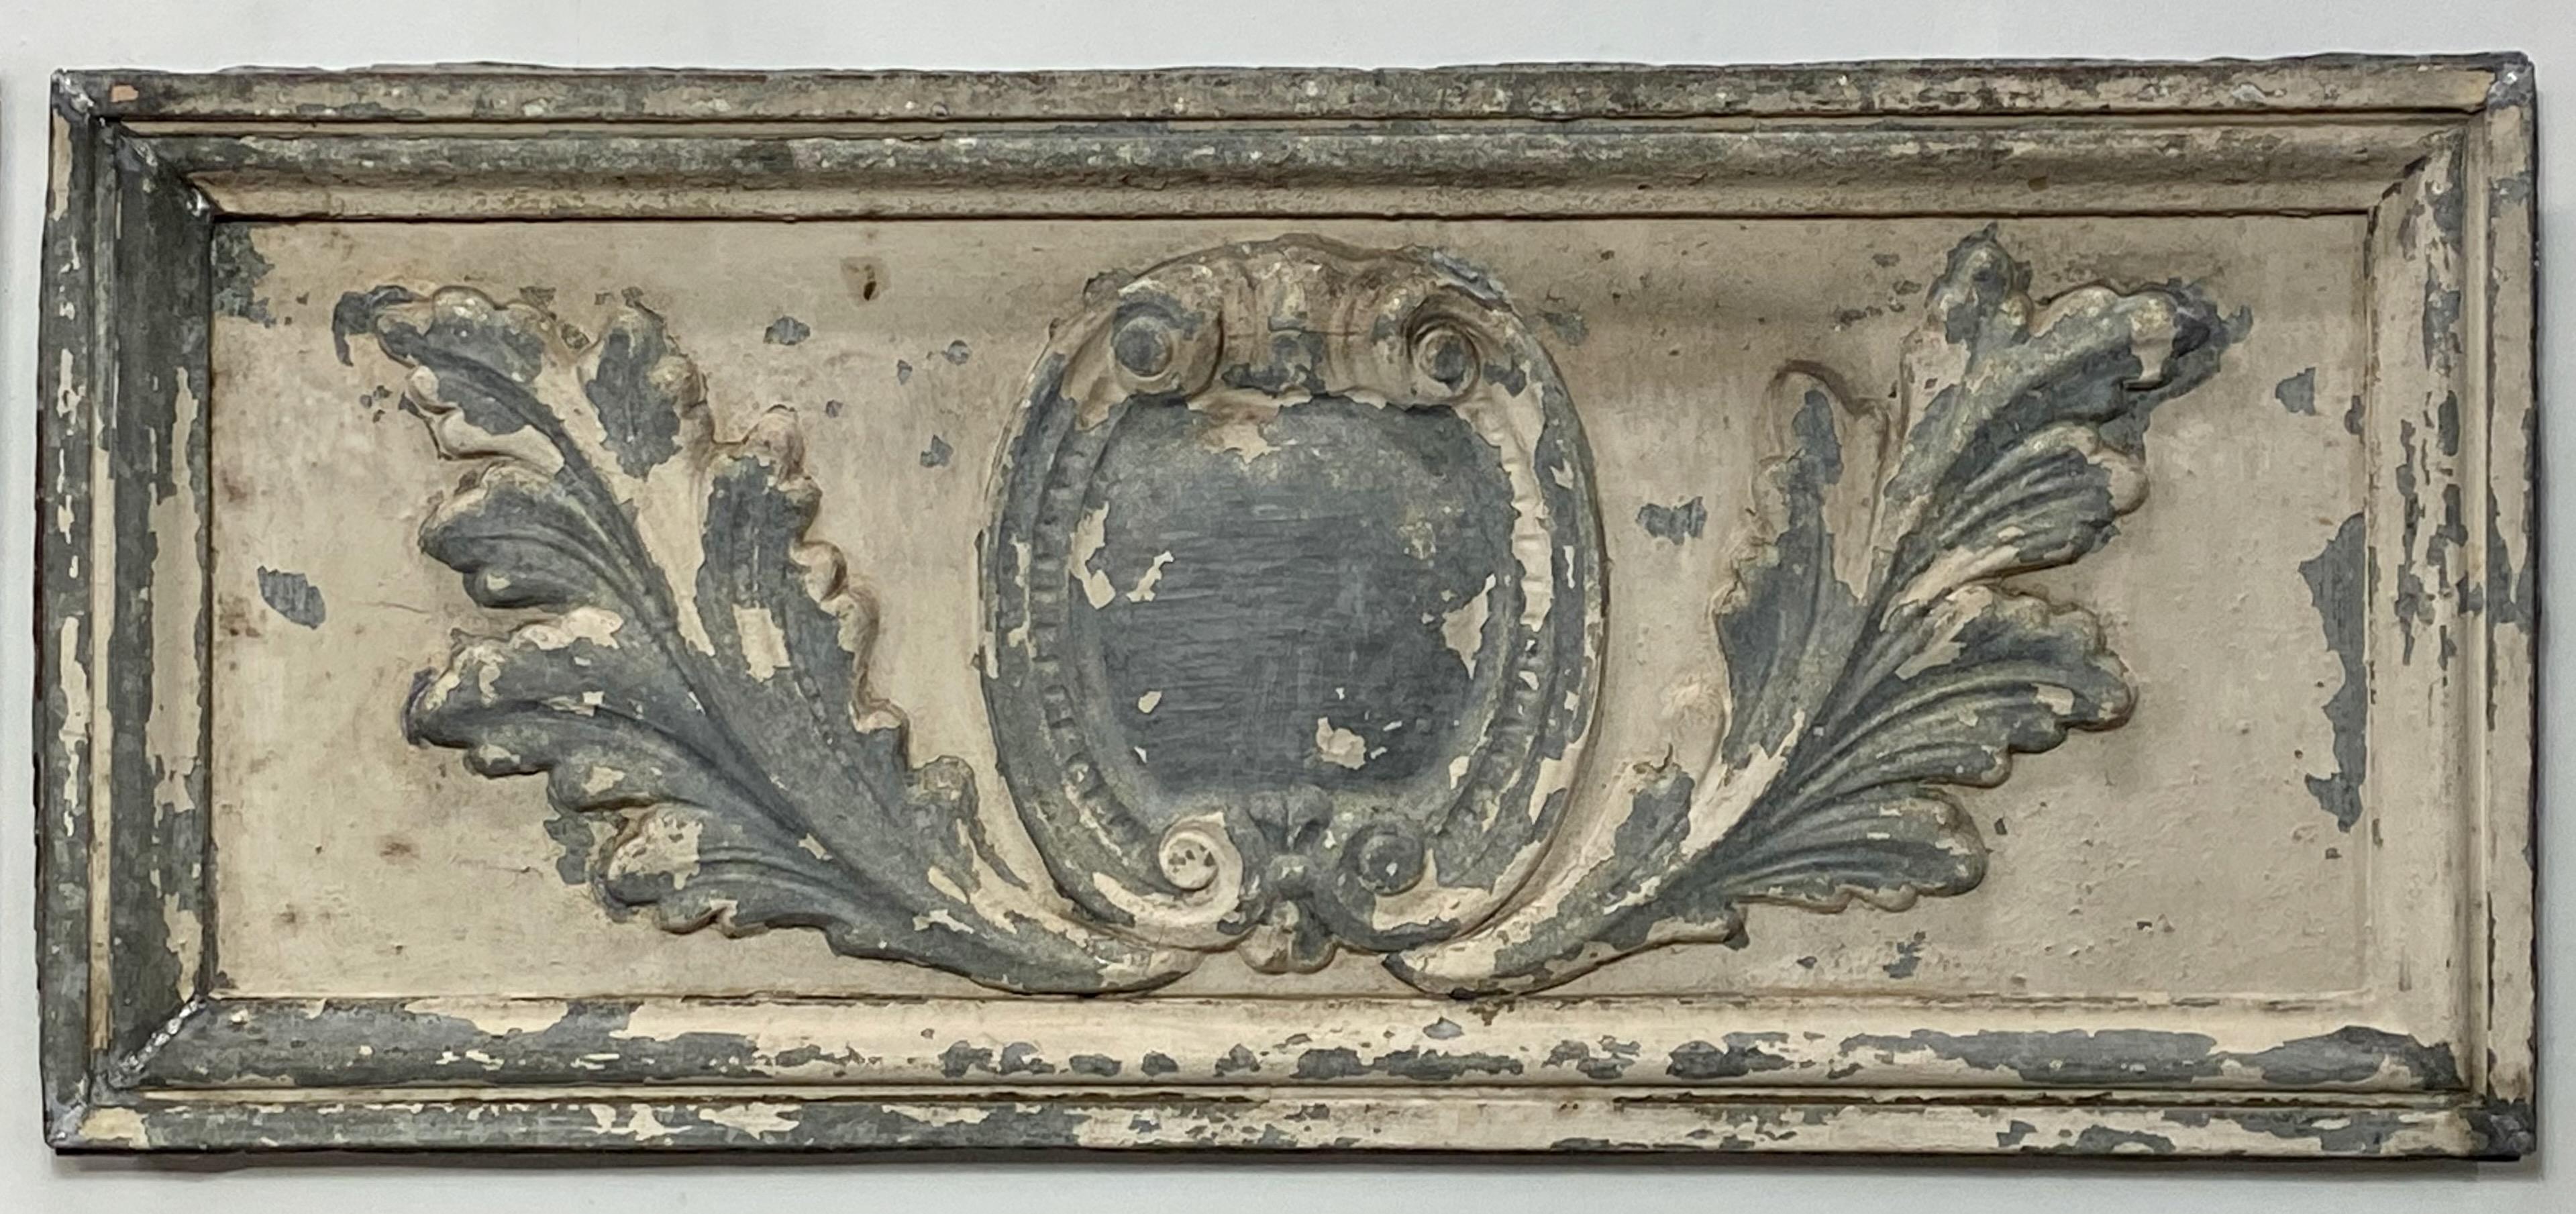 American Antique Architectural Element Tin Panels Wall Art, Late 19th Century